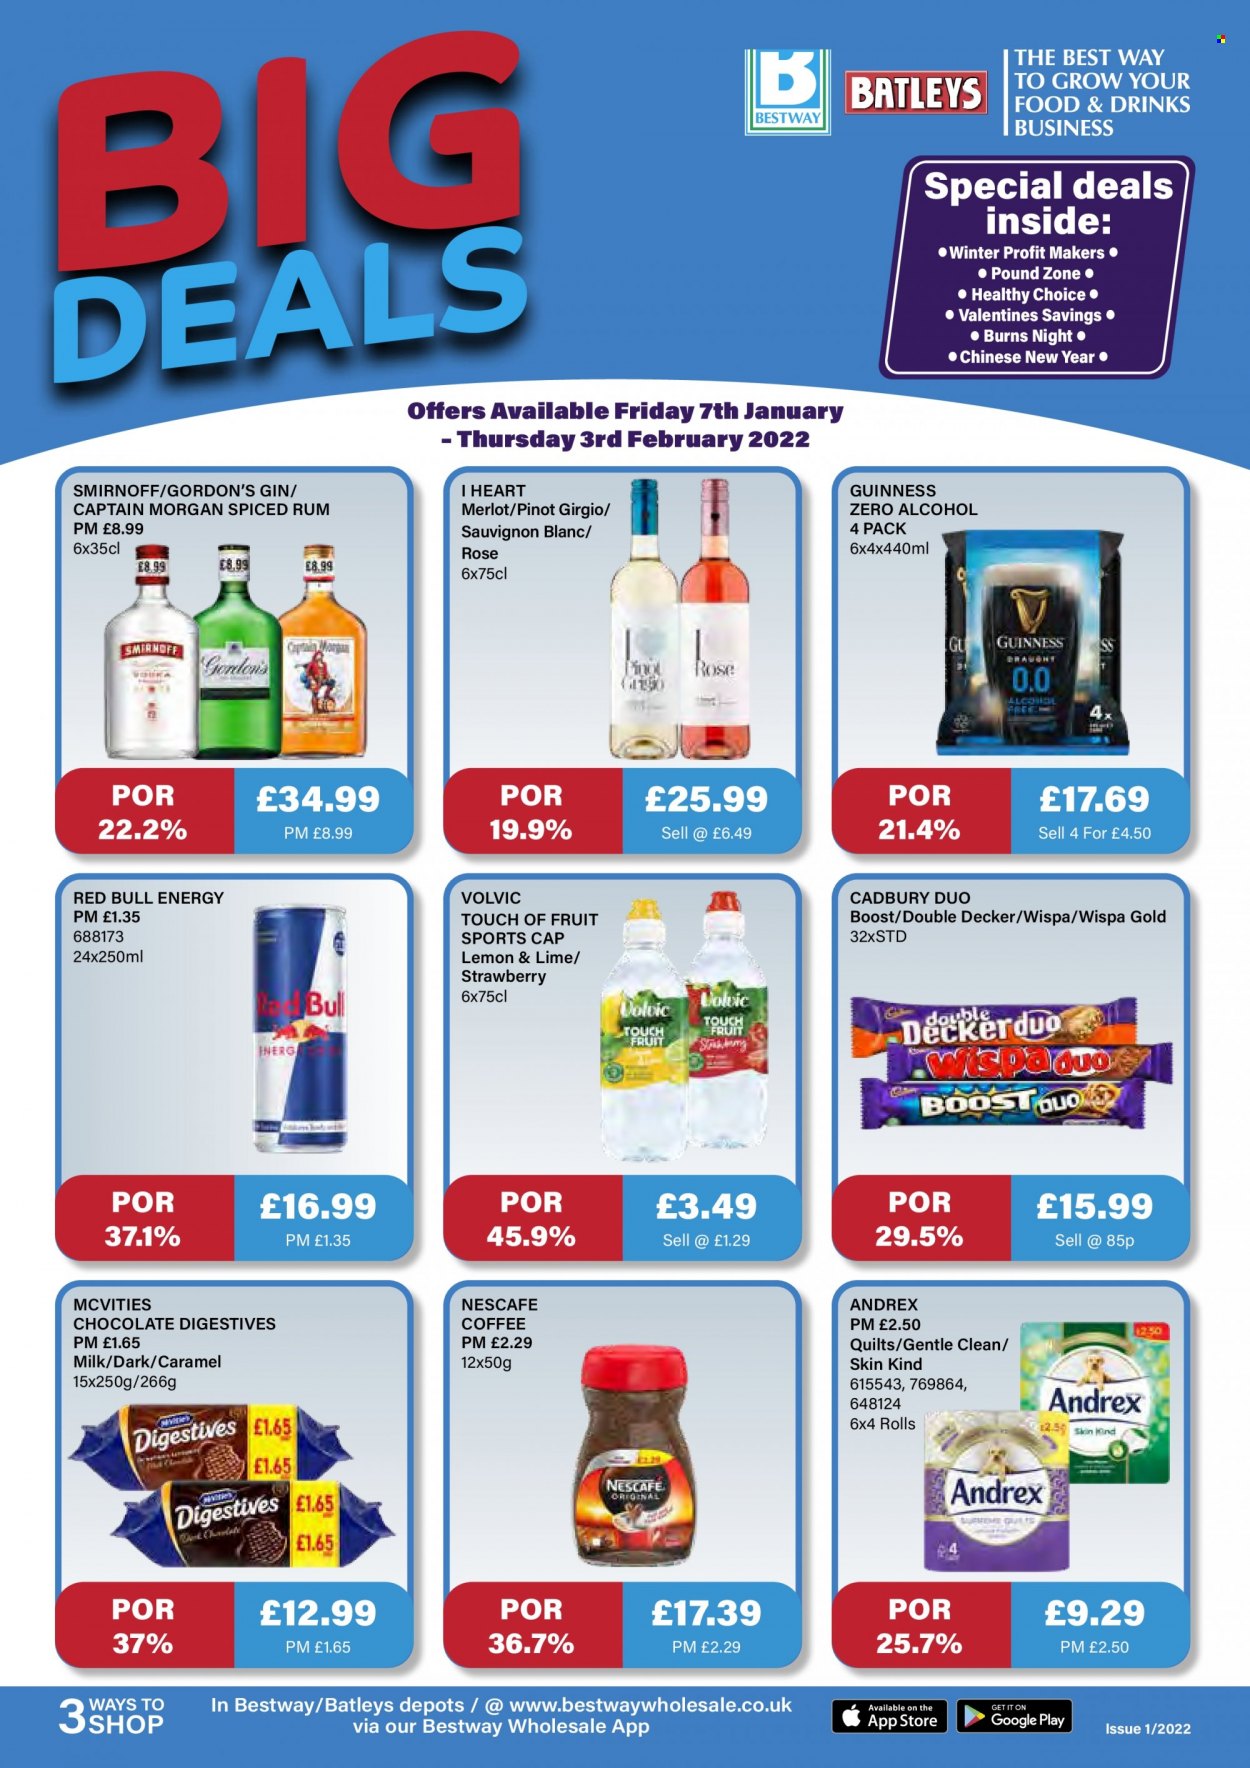 thumbnail - Bestway offer  - 07/01/2022 - 03/02/2022 - Sales products - alcohol, Guinness, Healthy Choice, chocolate, Cadbury, Red Bull, Volvic, Boost, coffee, Nescafé, red wine, white wine, wine, Merlot, Sauvignon Blanc, rosé wine, Captain Morgan, gin, Smirnoff, spiced rum, Gordon's, rum, quilt. Page 1.